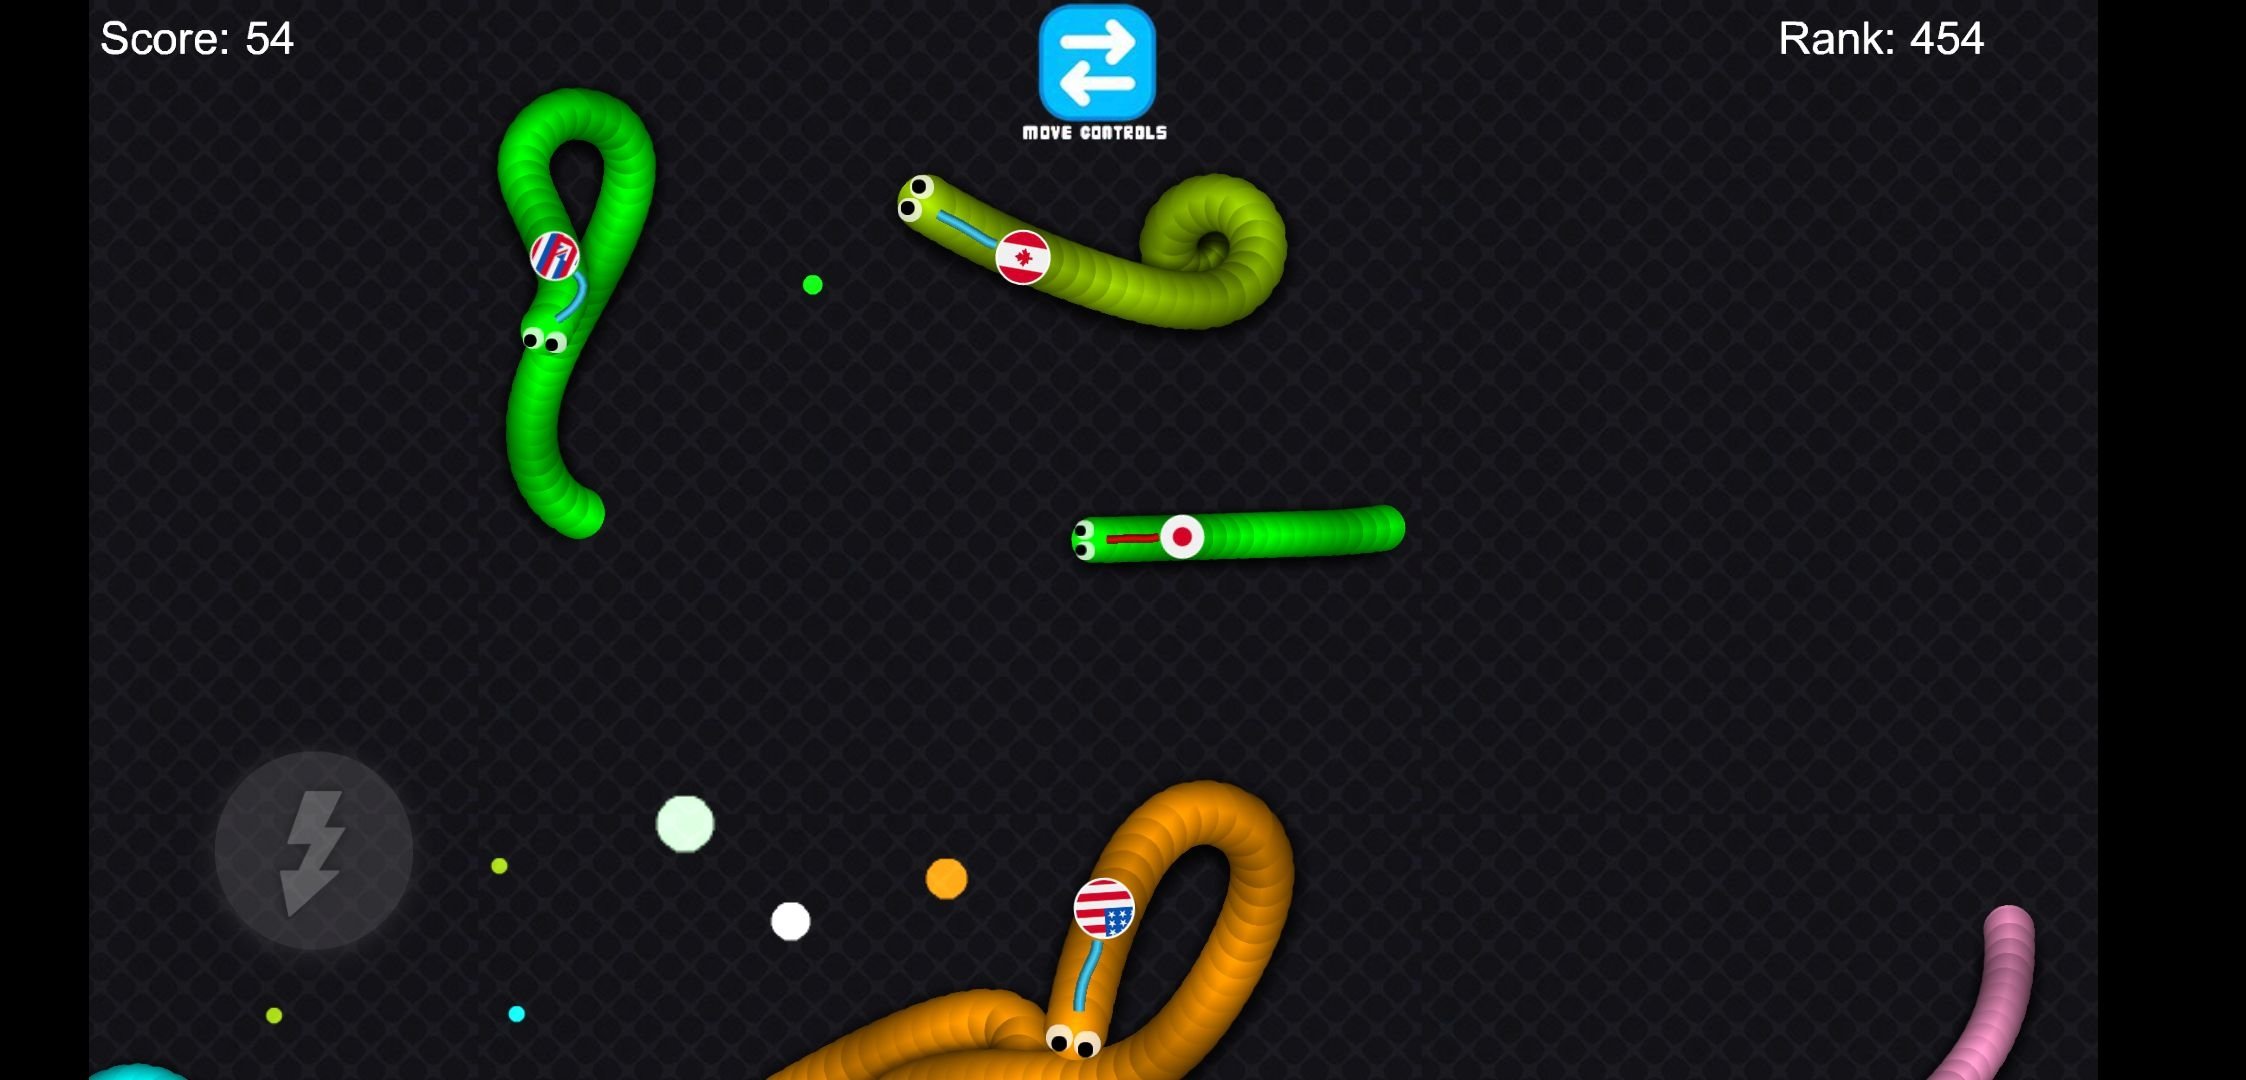 Slink.io - Snake Games - Apps on Google Play